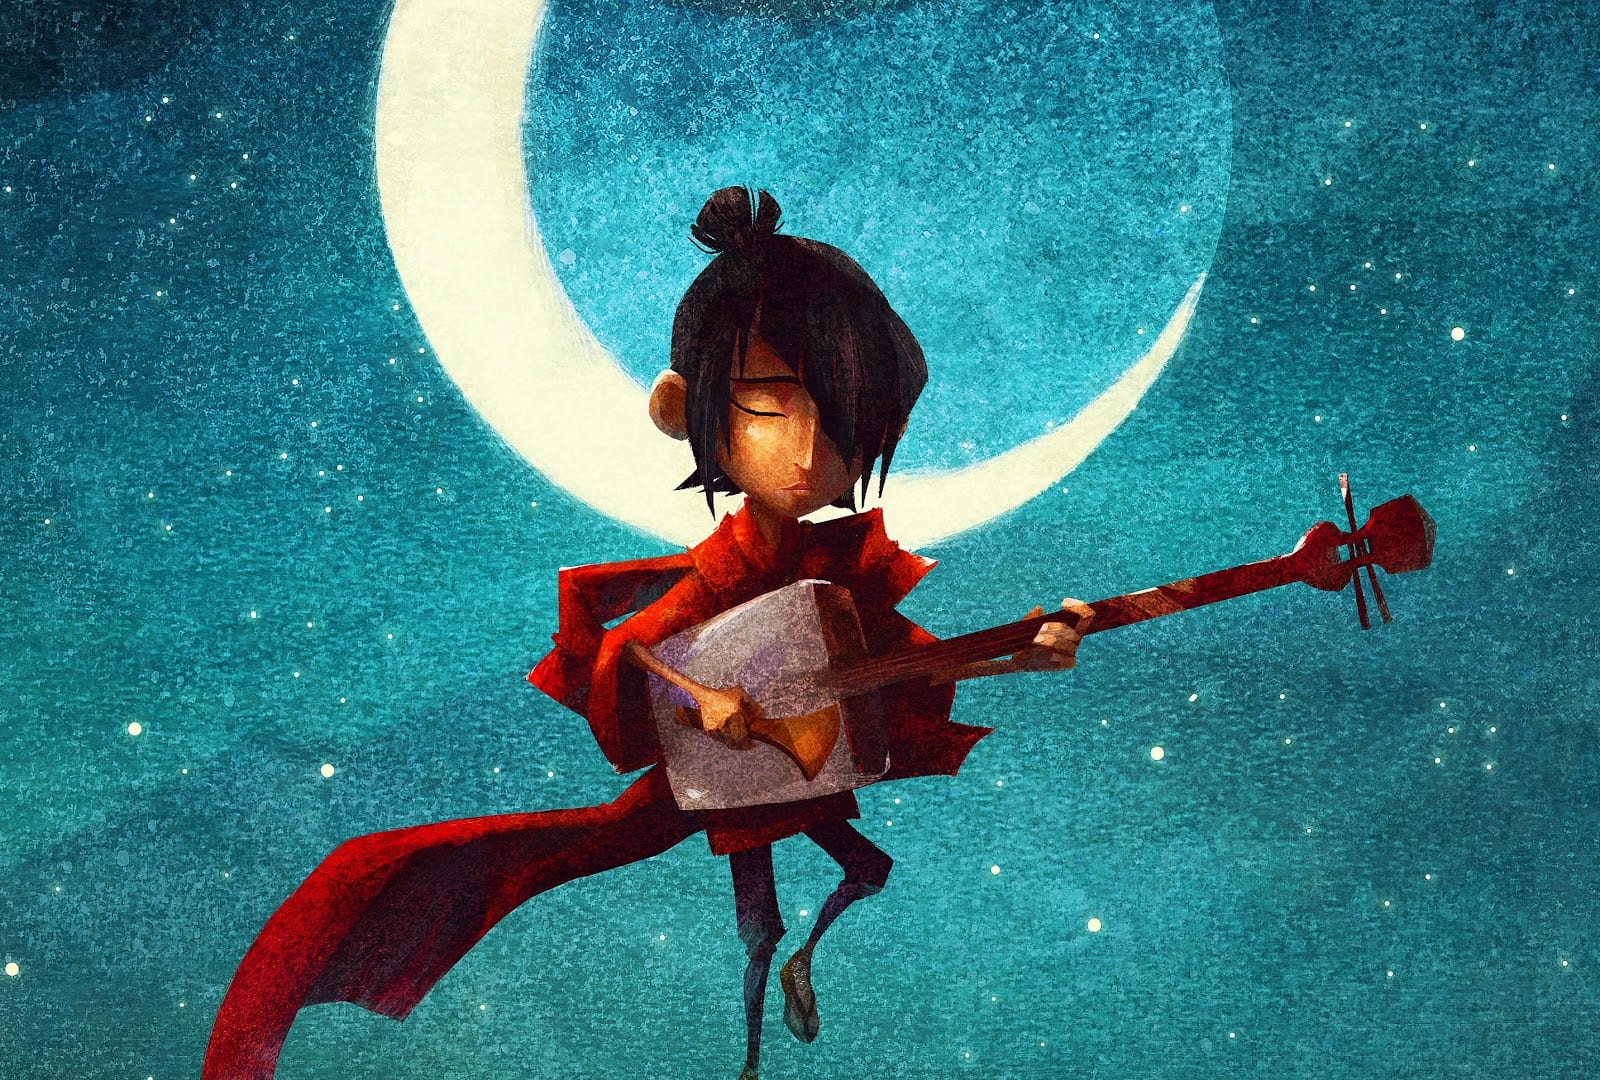 Kubo y las dos cuerdas mágicas (Kubo and the Two Strings)